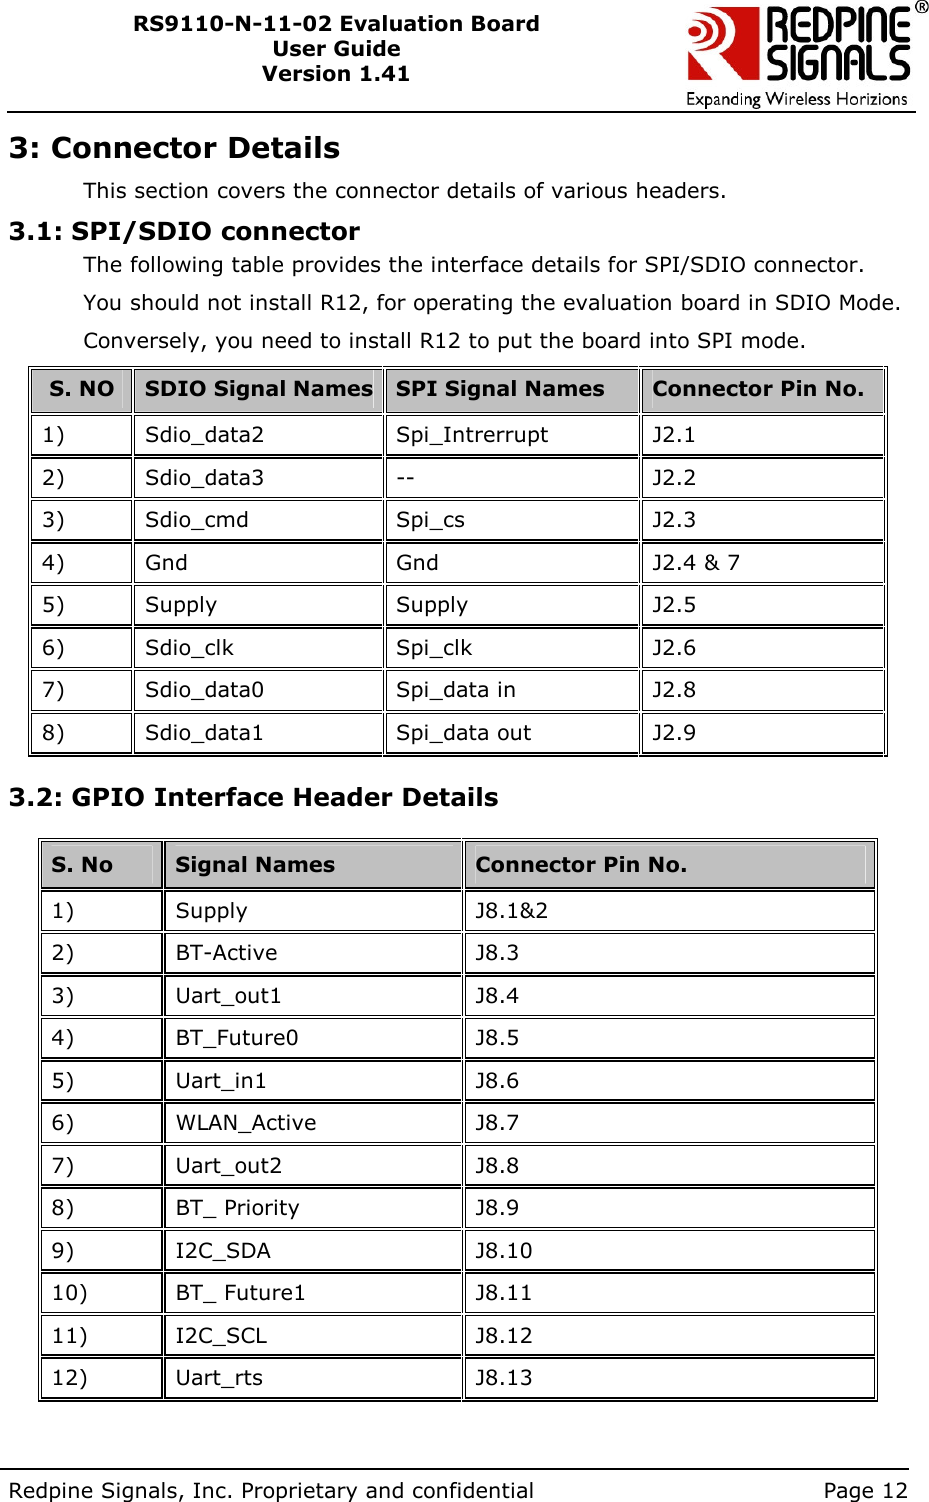        Redpine Signals, Inc. Proprietary and confidential    Page 12 RS9110-N-11-02 Evaluation Board User Guide Version 1.41  3: Connector Details This section covers the connector details of various headers. 3.1: SPI/SDIO connector The following table provides the interface details for SPI/SDIO connector.  You should not install R12, for operating the evaluation board in SDIO Mode. Conversely, you need to install R12 to put the board into SPI mode.  S. NO SDIO Signal Names SPI Signal Names  Connector Pin No. 1)  Sdio_data2  Spi_Intrerrupt  J2.1 2)  Sdio_data3  --  J2.2 3)  Sdio_cmd  Spi_cs  J2.3 4)  Gnd  Gnd  J2.4 &amp; 7 5)  Supply  Supply  J2.5 6)  Sdio_clk  Spi_clk  J2.6 7)  Sdio_data0  Spi_data in  J2.8 8)  Sdio_data1  Spi_data out  J2.9  3.2: GPIO Interface Header Details  S. No  Signal Names  Connector Pin No. 1)    Supply   J8.1&amp;2 2)    BT-Active  J8.3 3)    Uart_out1  J8.4 4)    BT_Future0  J8.5 5)    Uart_in1  J8.6 6)    WLAN_Active  J8.7 7)    Uart_out2  J8.8 8)    BT_ Priority  J8.9 9)    I2C_SDA  J8.10 10)   BT_ Future1  J8.11 11)   I2C_SCL  J8.12 12)   Uart_rts  J8.13 